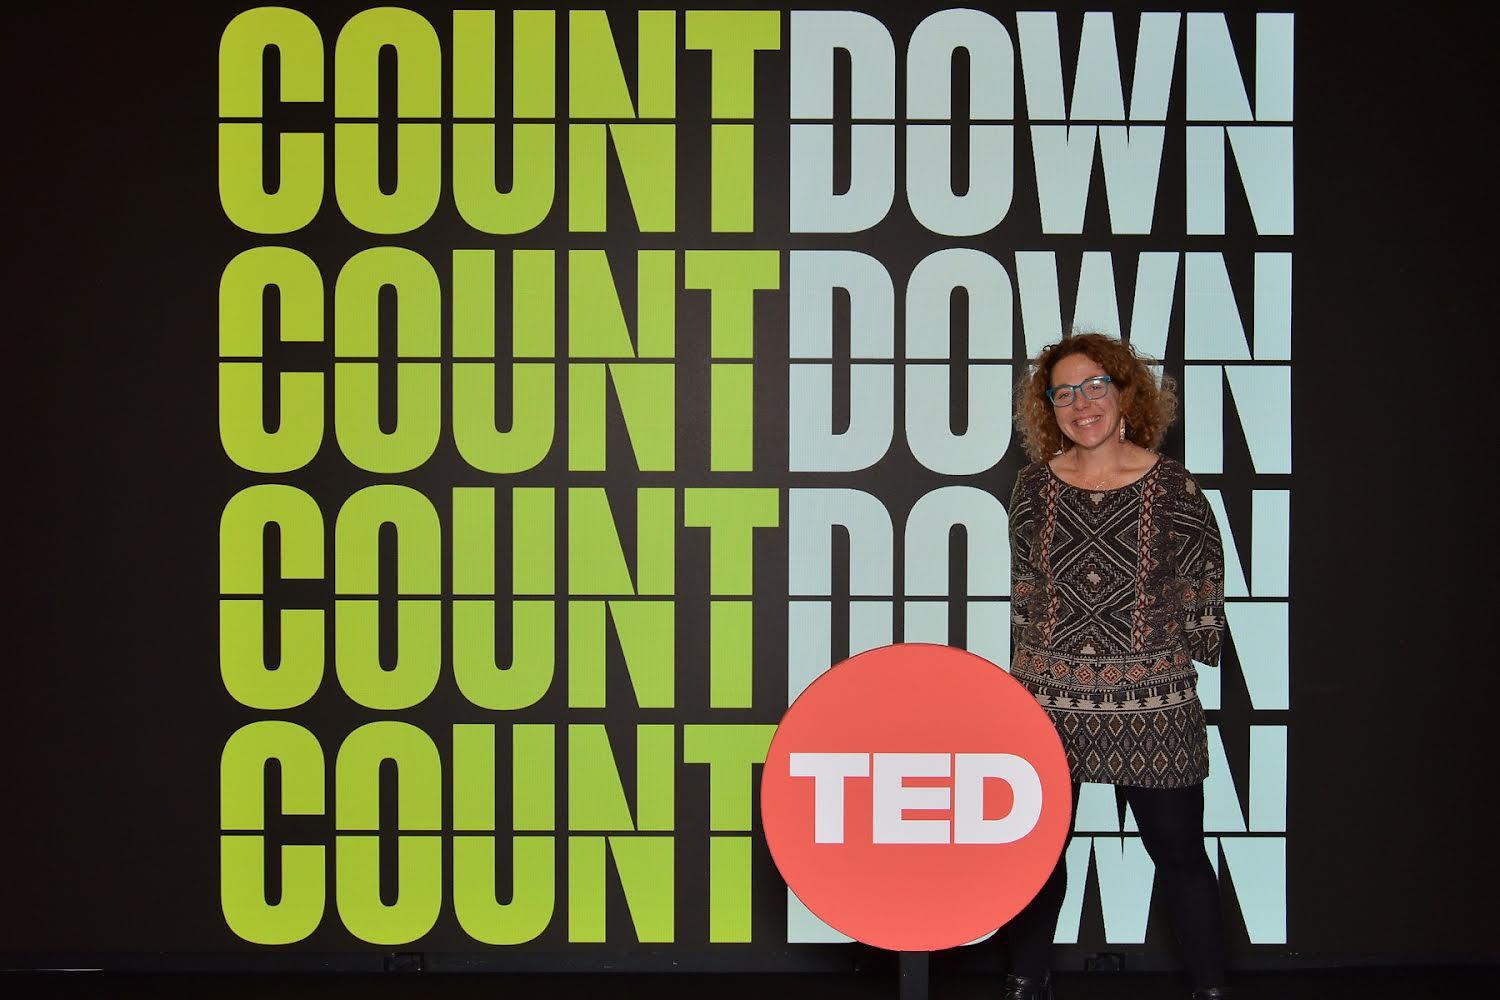 Jen posing in front of TED signage